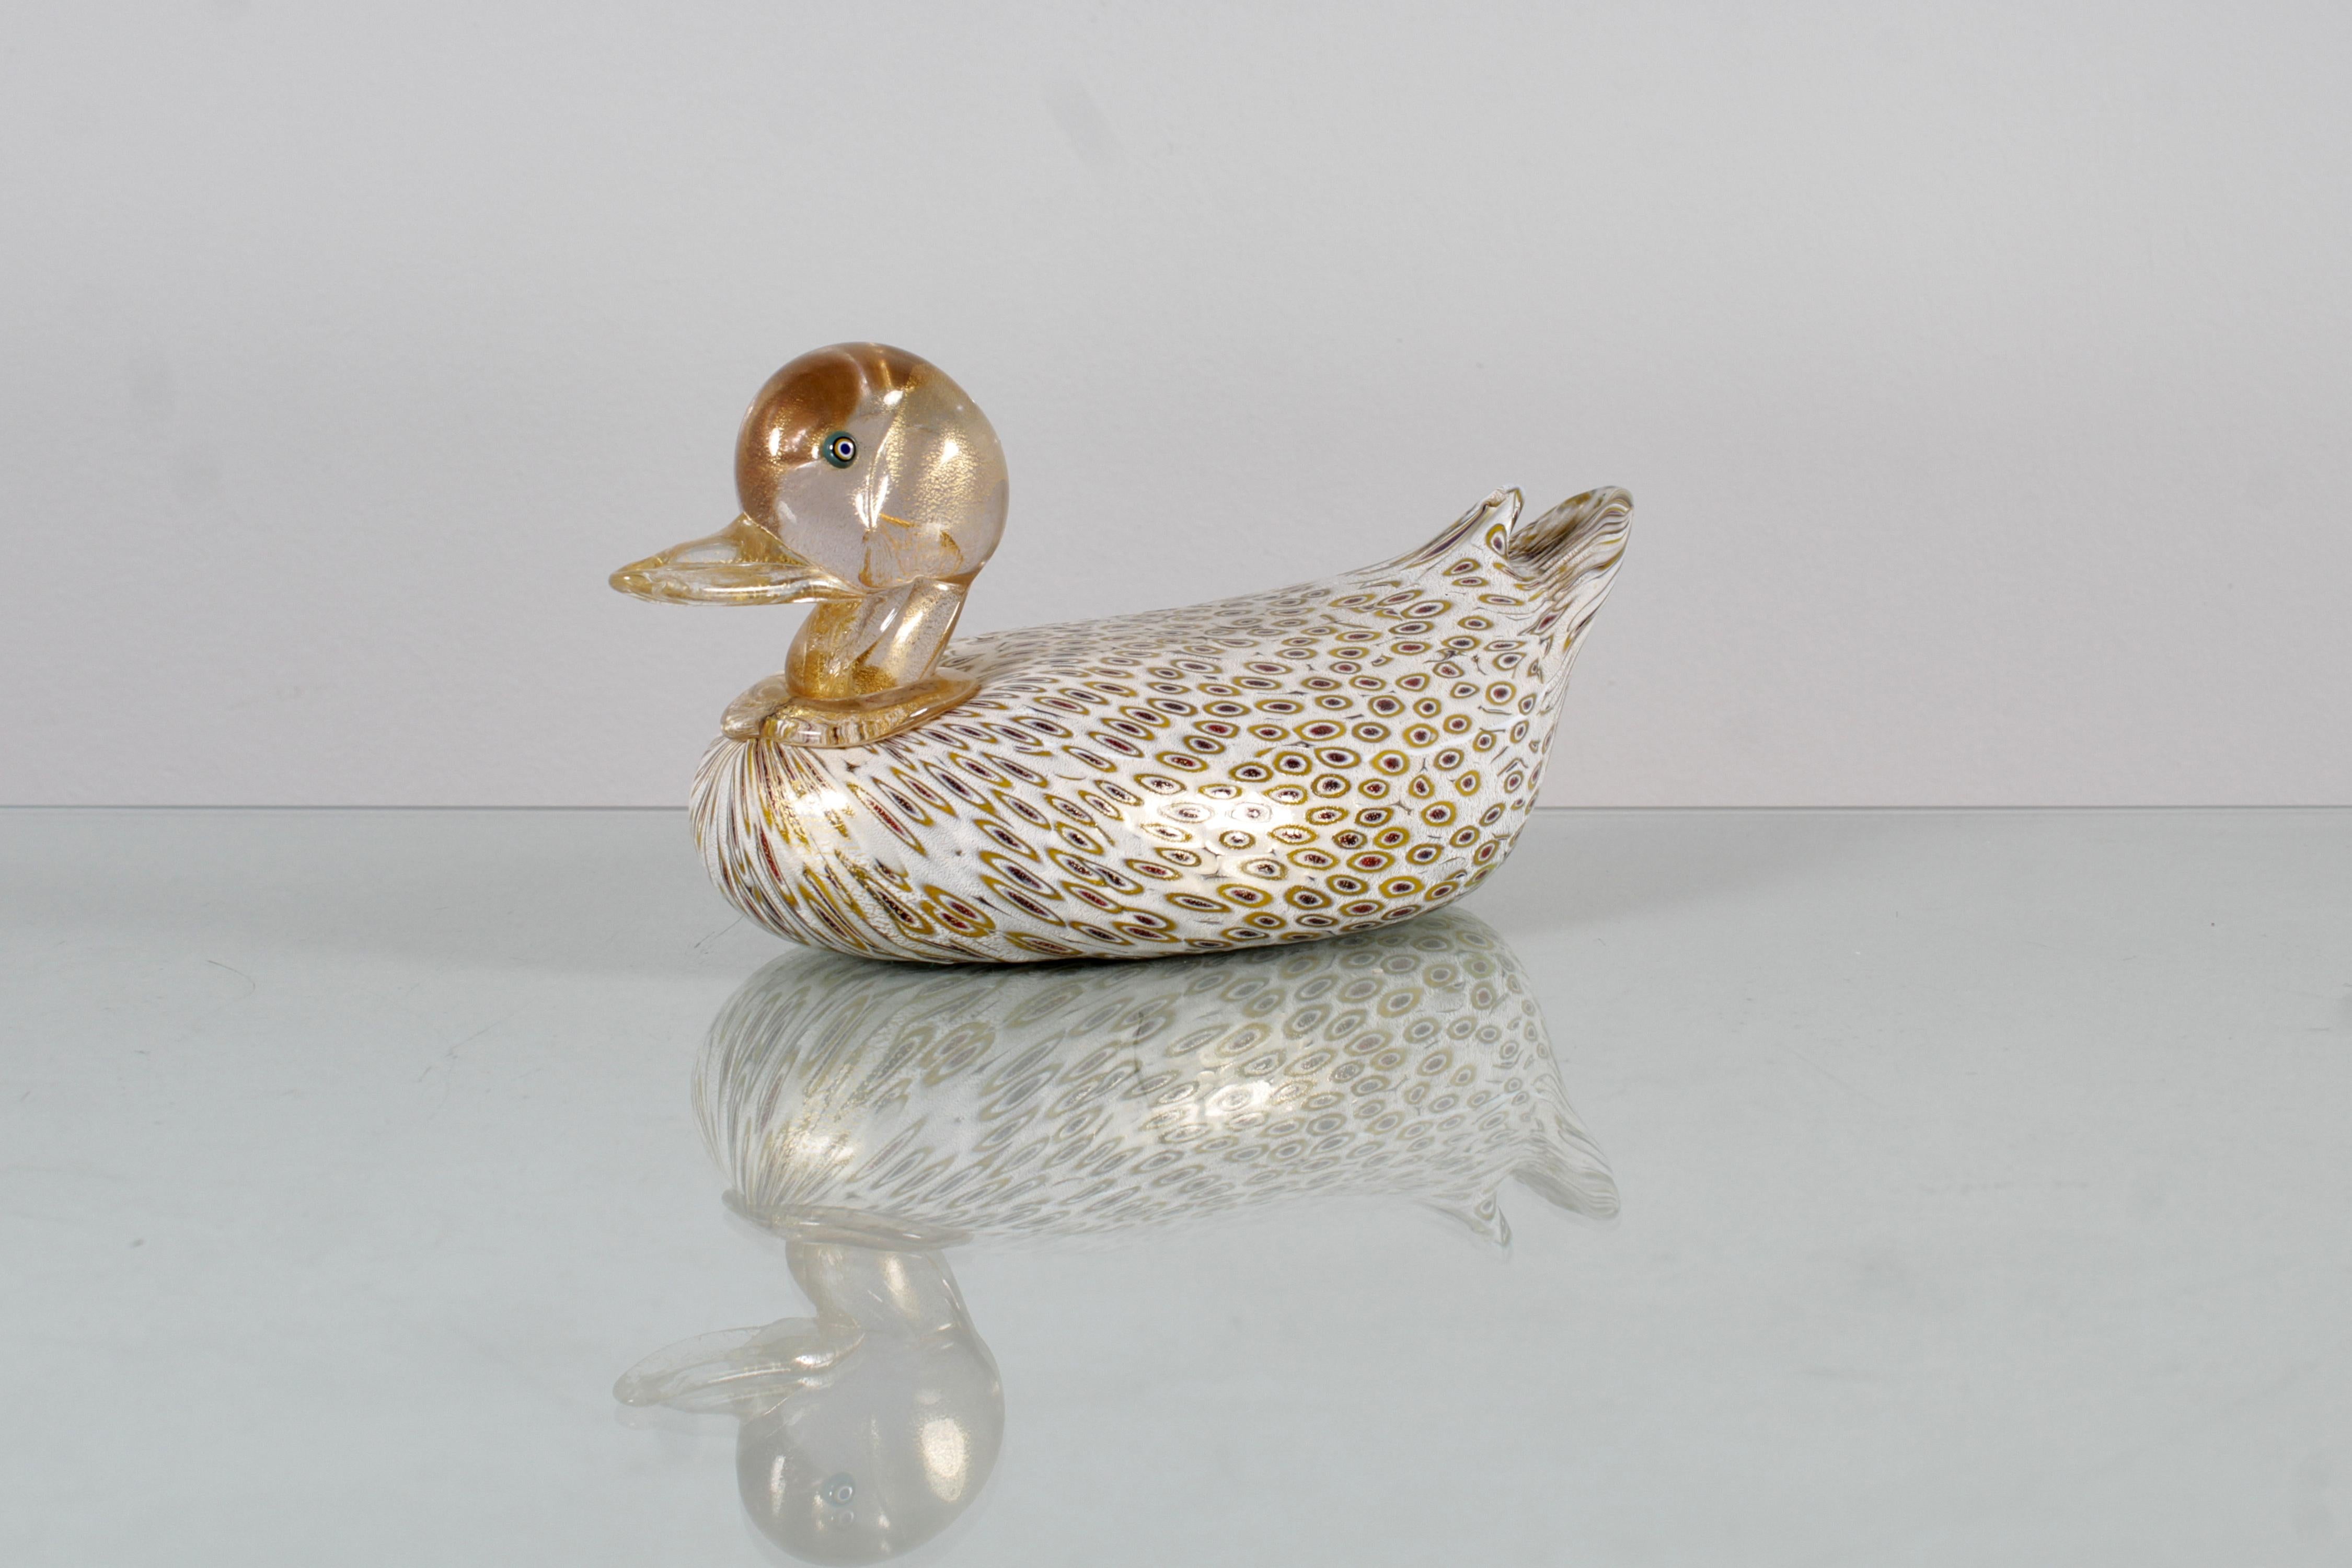 Murano glass sculpture attributed to Alfredo Barbini depicting a duck with milk glass body decorated with red and ocher murrine, head and neck in transparent glass with gold inclusions, turquoise eyes. Venetian manufacture from the 1960s.
Wear